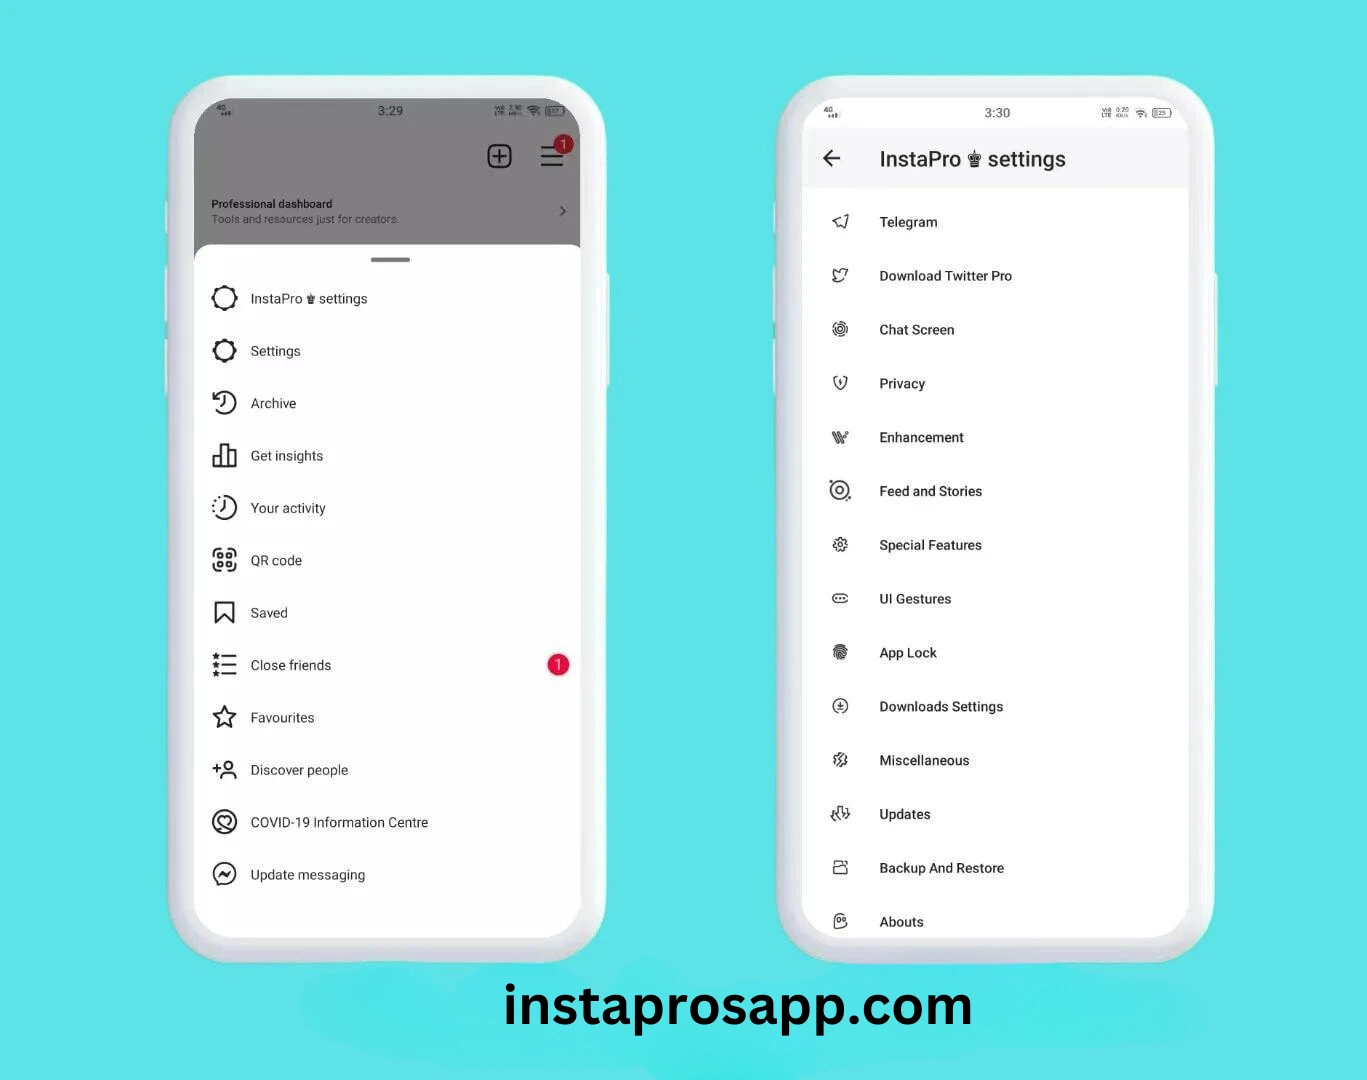 InstaPro Apk with Latest Features